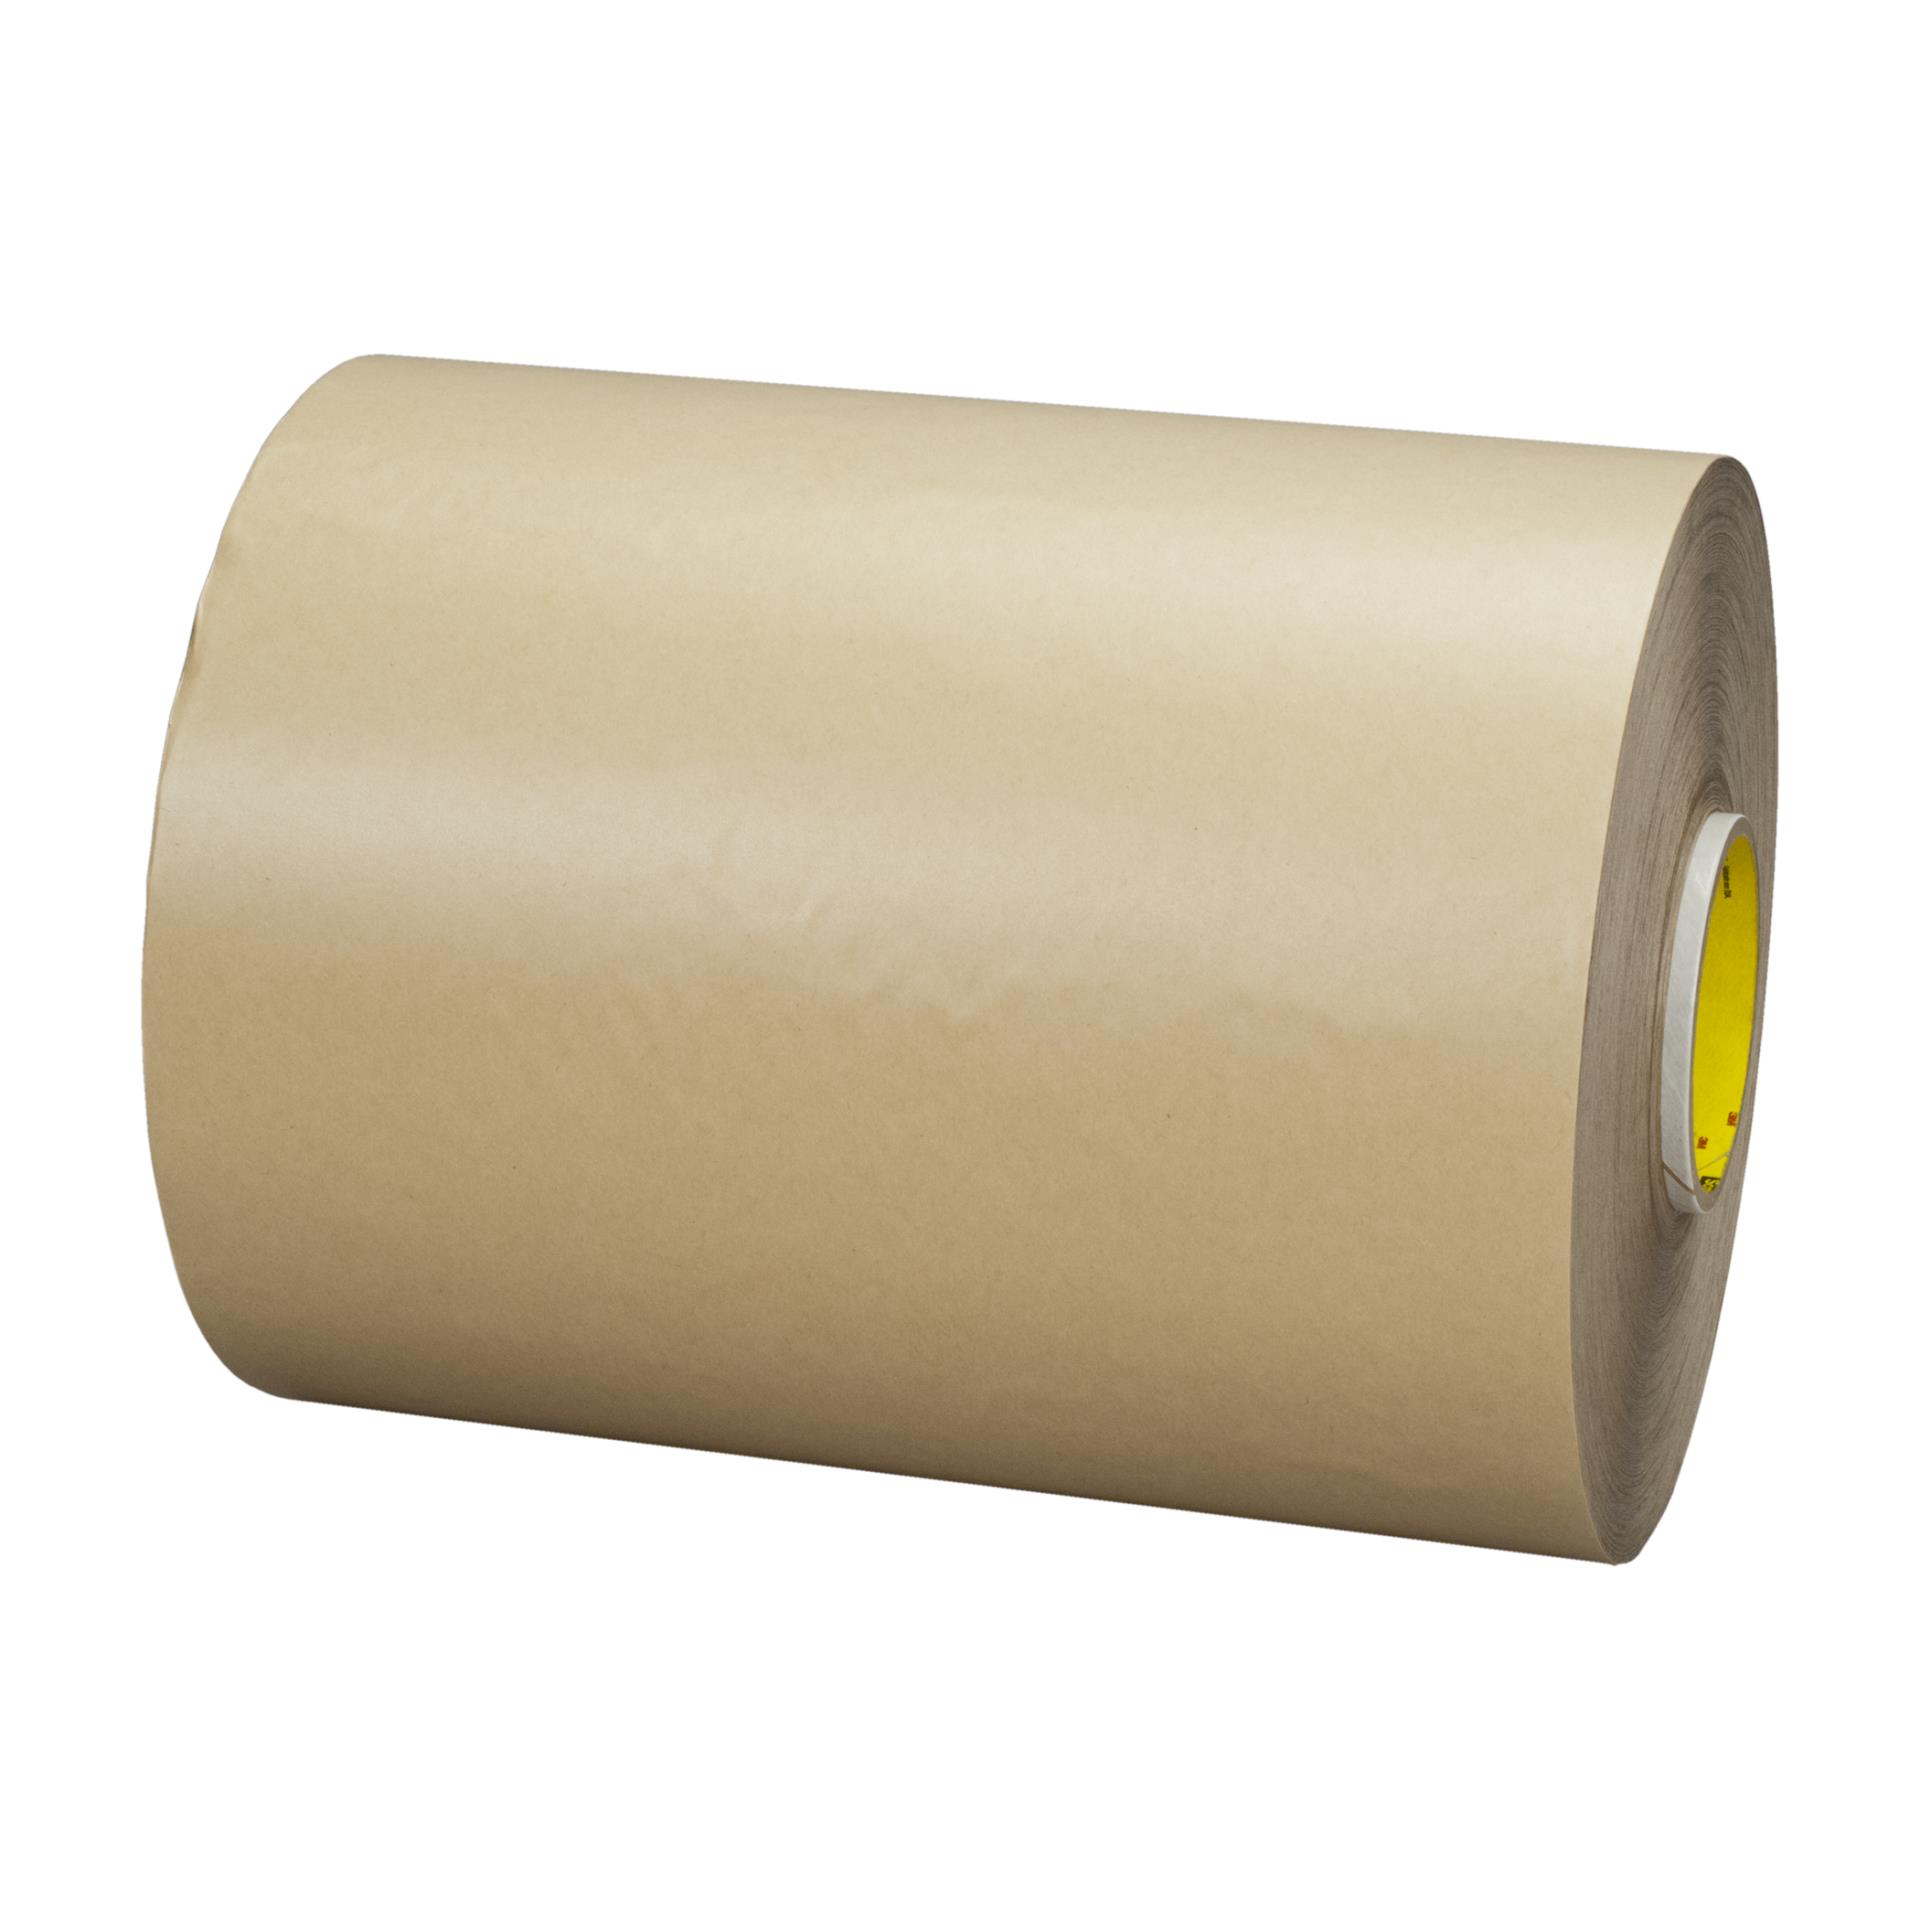 00051111921135 3M™ Adhesive Transfer Tape 6035PC, Clear, 13 in x 60 yd,  mil, roll per case Aircraft products 3M 9345509